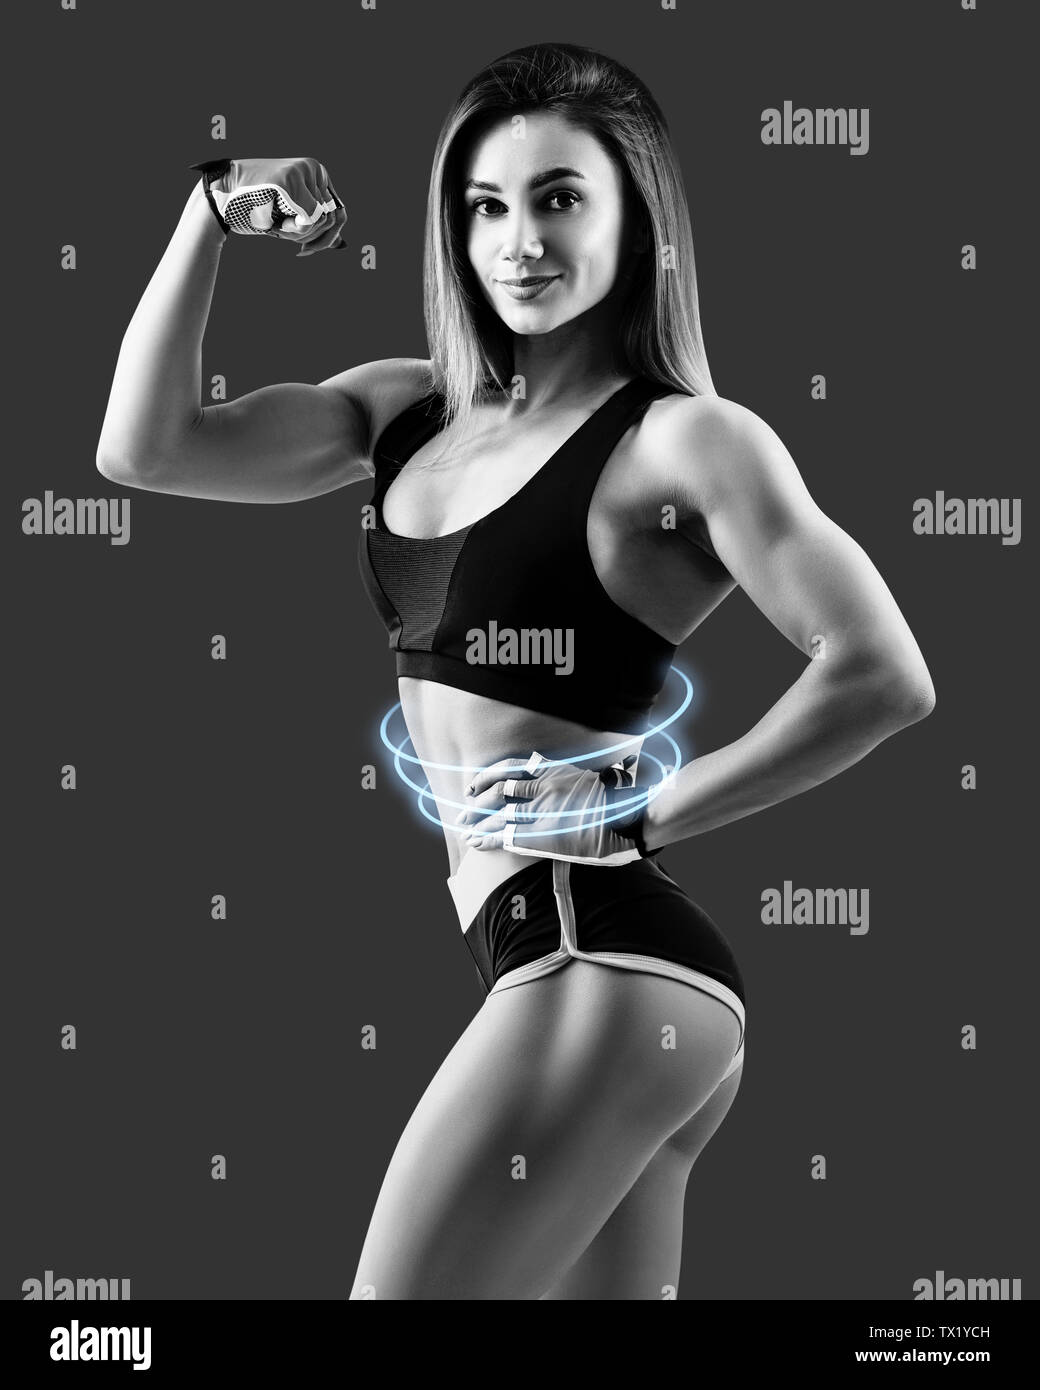 Young woman demonstrated her beautiful muscular athletic body. Stock Photo